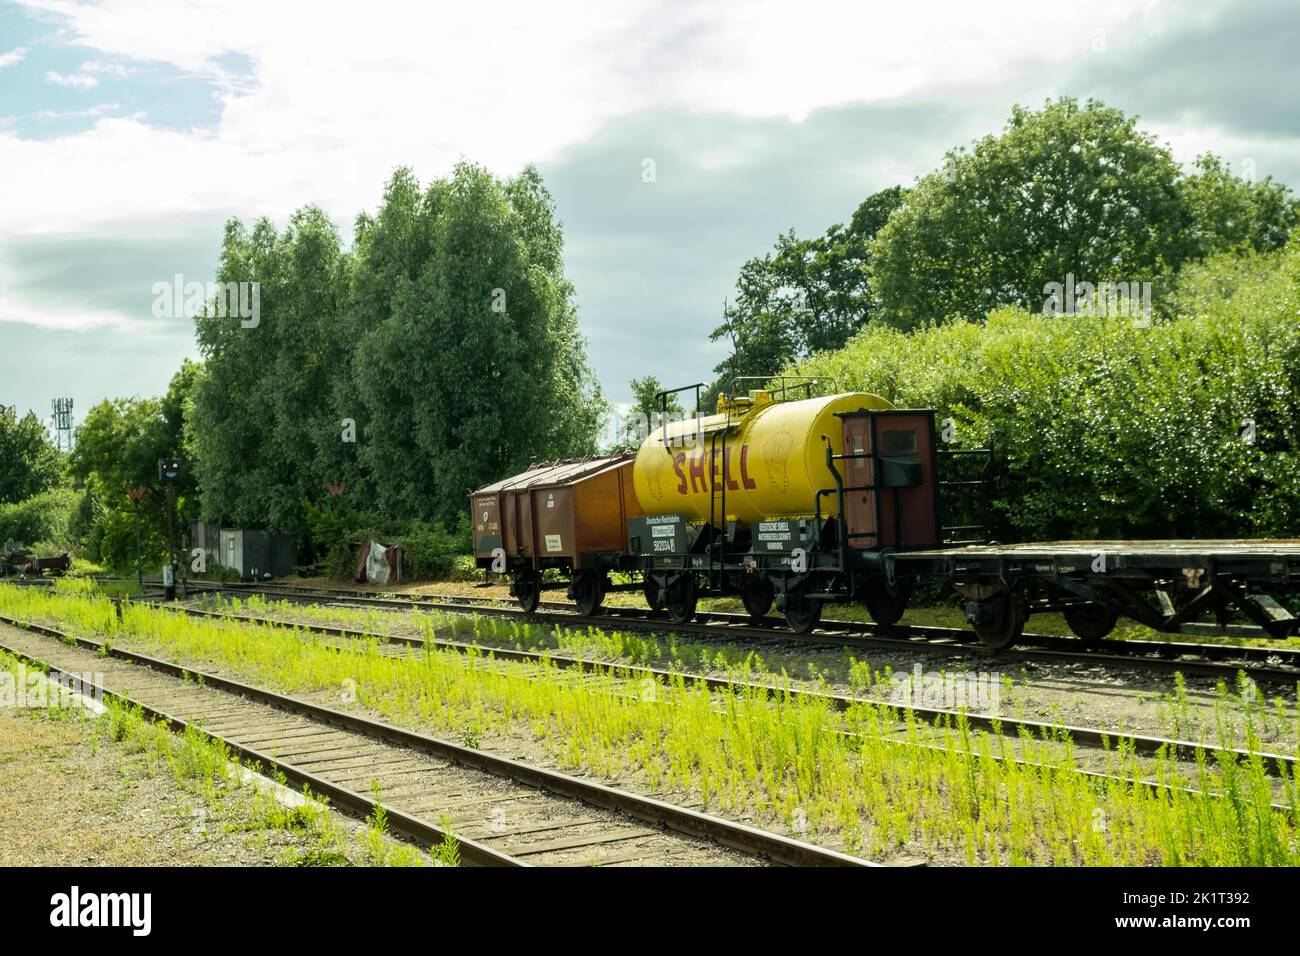 An old shell wagon in a train museum Stock Photo